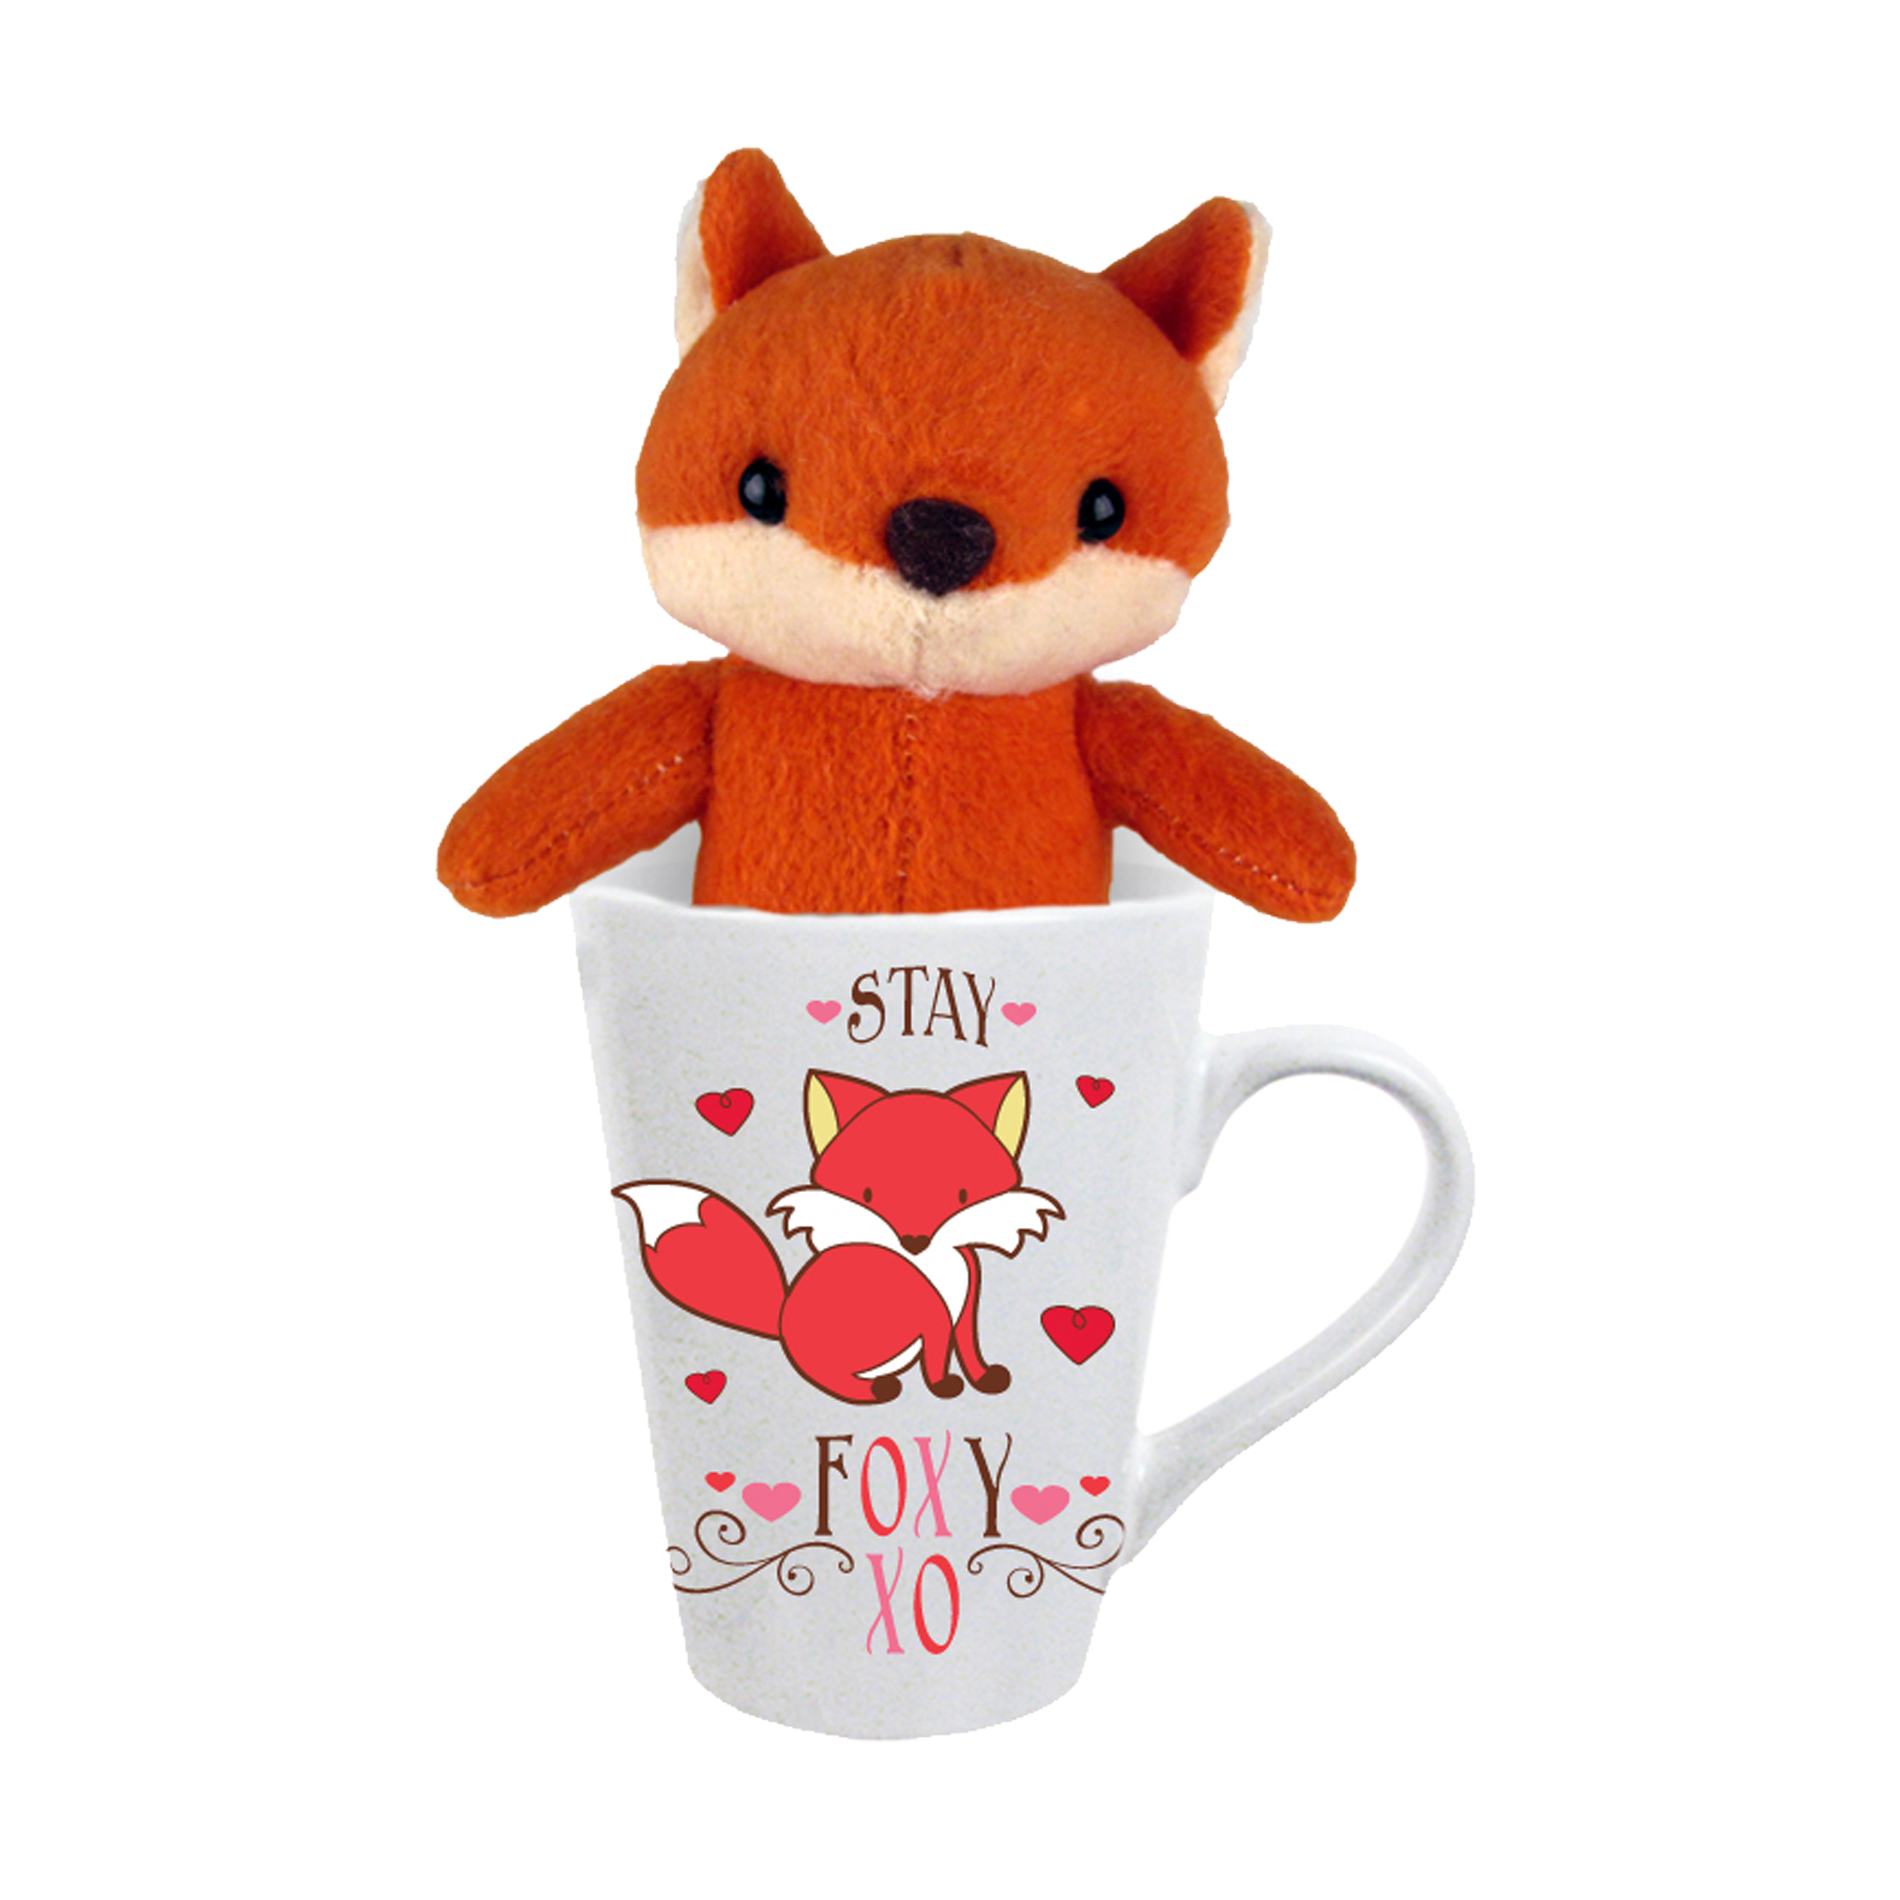 Cute Valentine Plush in Mugs Only $3.49 + More Deals Up to 50% Off!